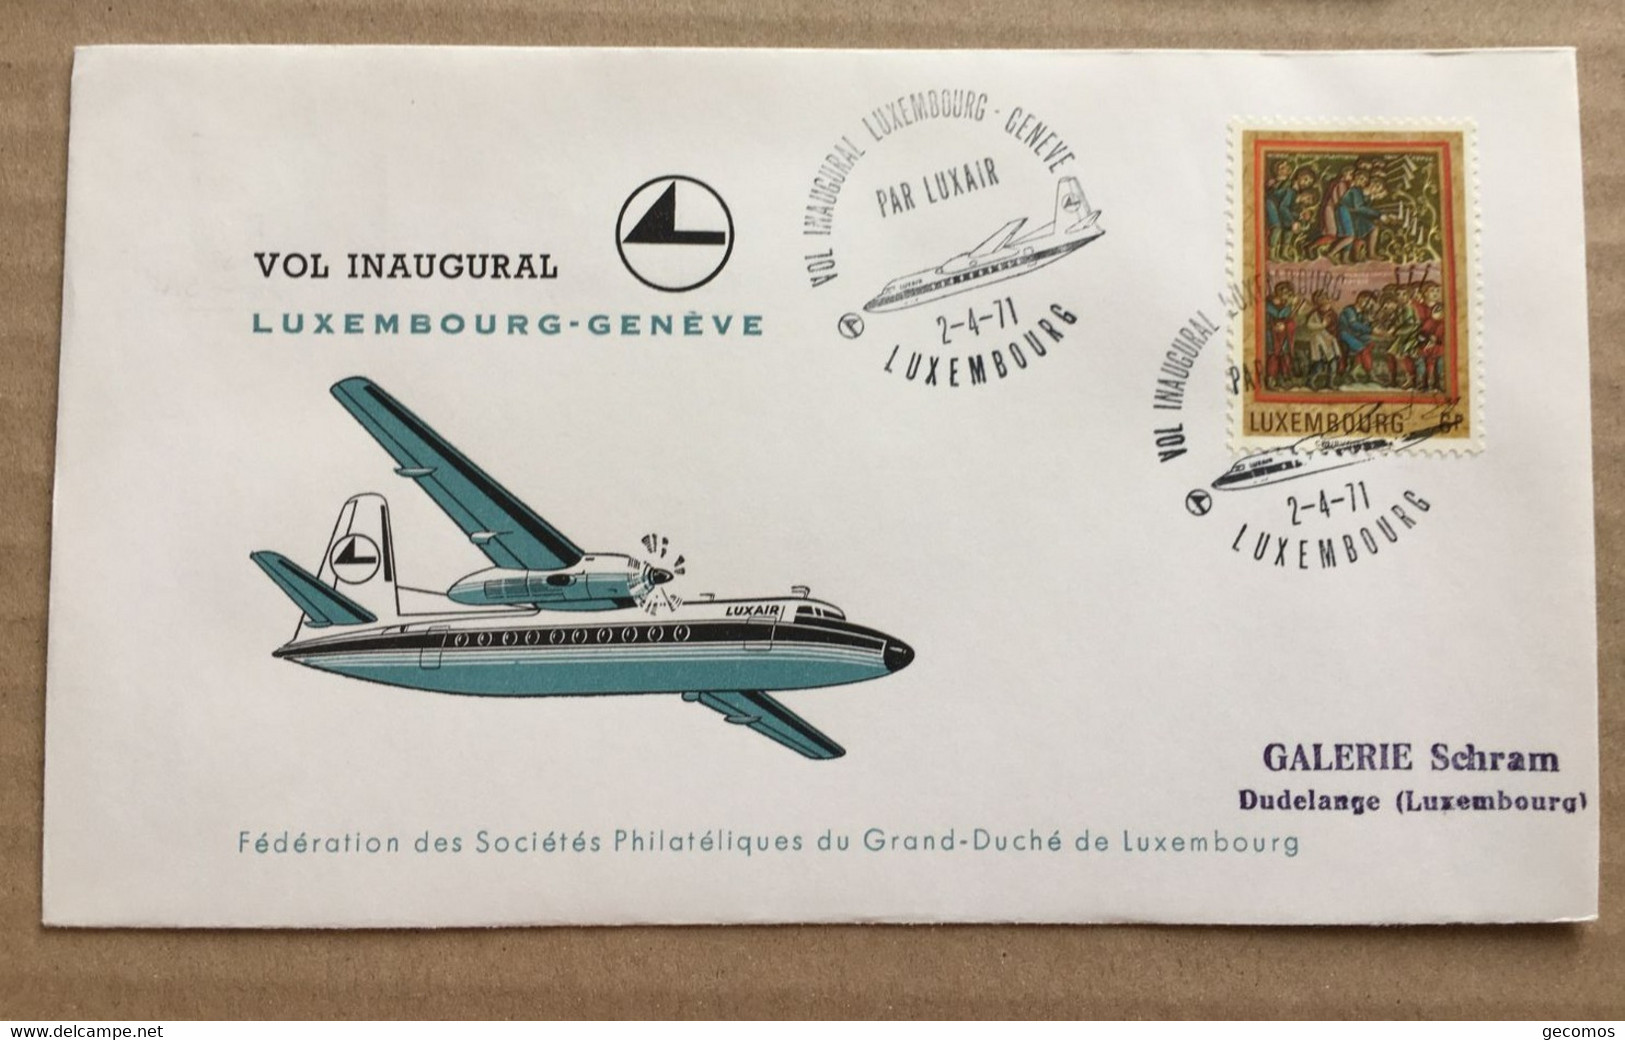 VOL INAUGURAL LUXEMBOURG-GENEVE 2-4-71 - (Avion LUXAIR.) - Storia Postale